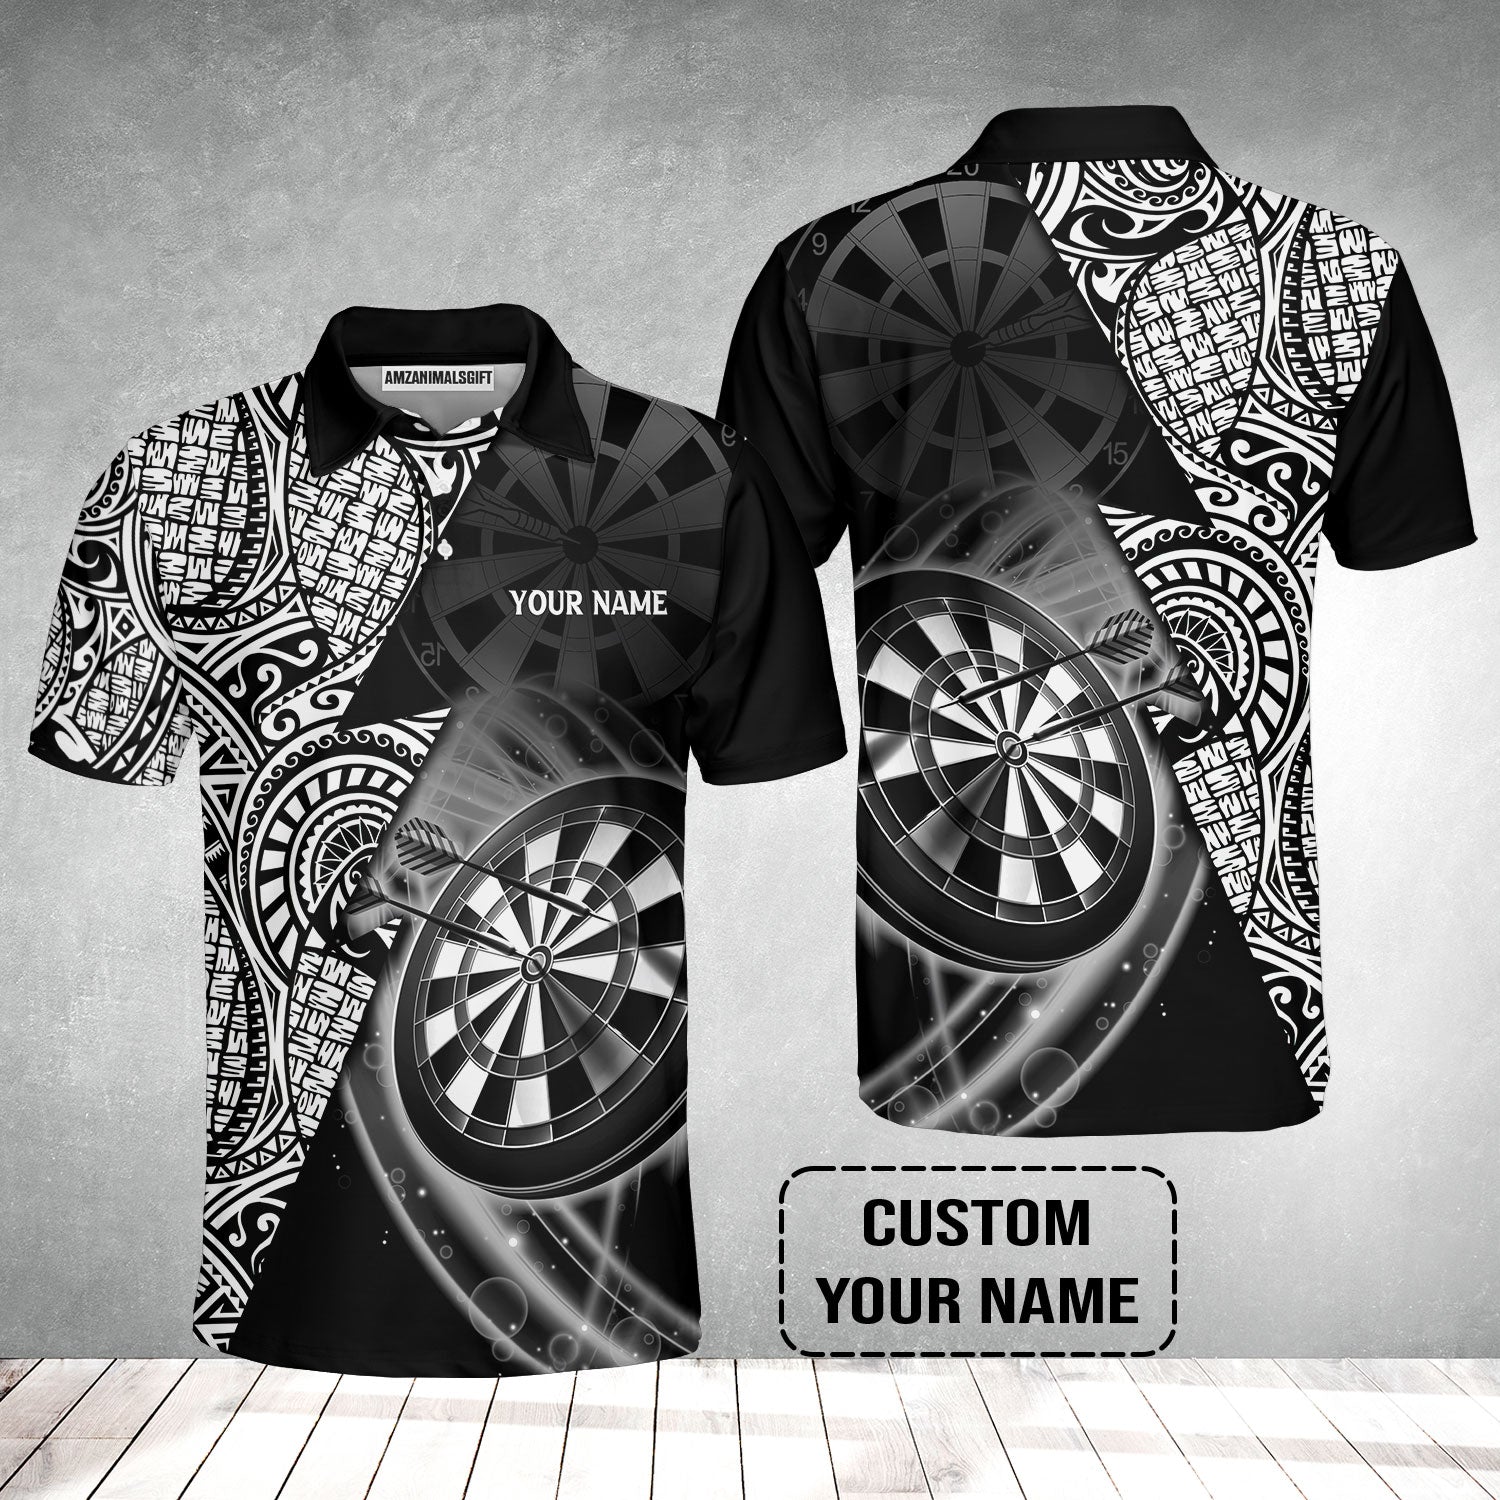 Customized Darts Polo Shirt, Black & White Tattoo Darts, Personalized Name Polo Shirt For Men - Perfect Gift For Darts Lovers, Darts Players